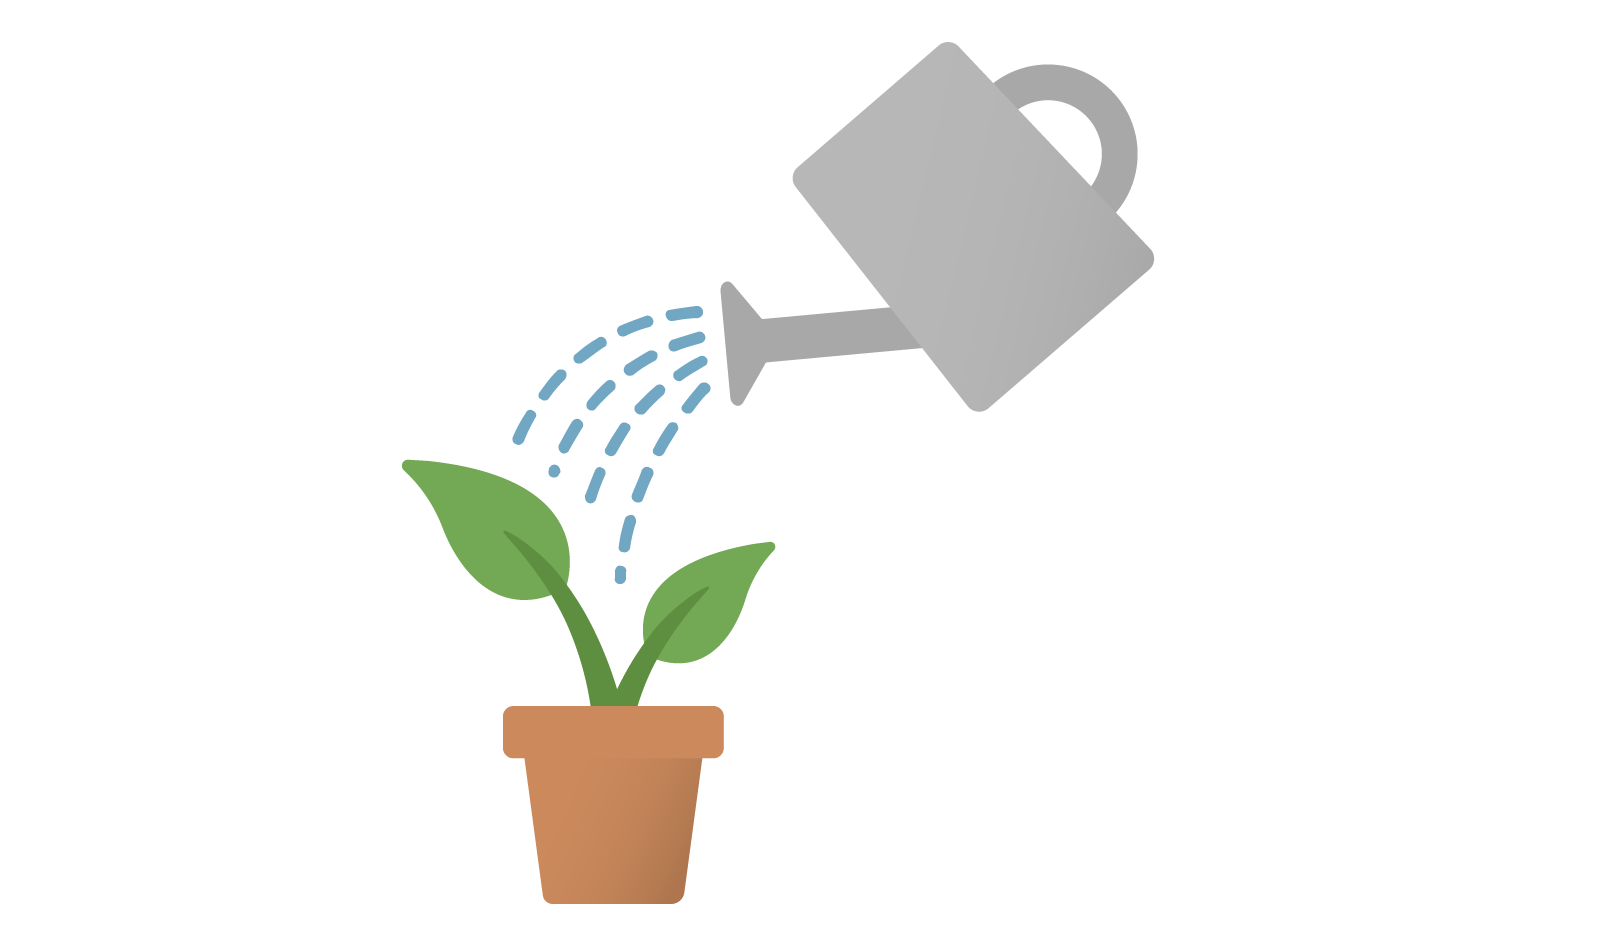 Illustration of a plant being watered and growing